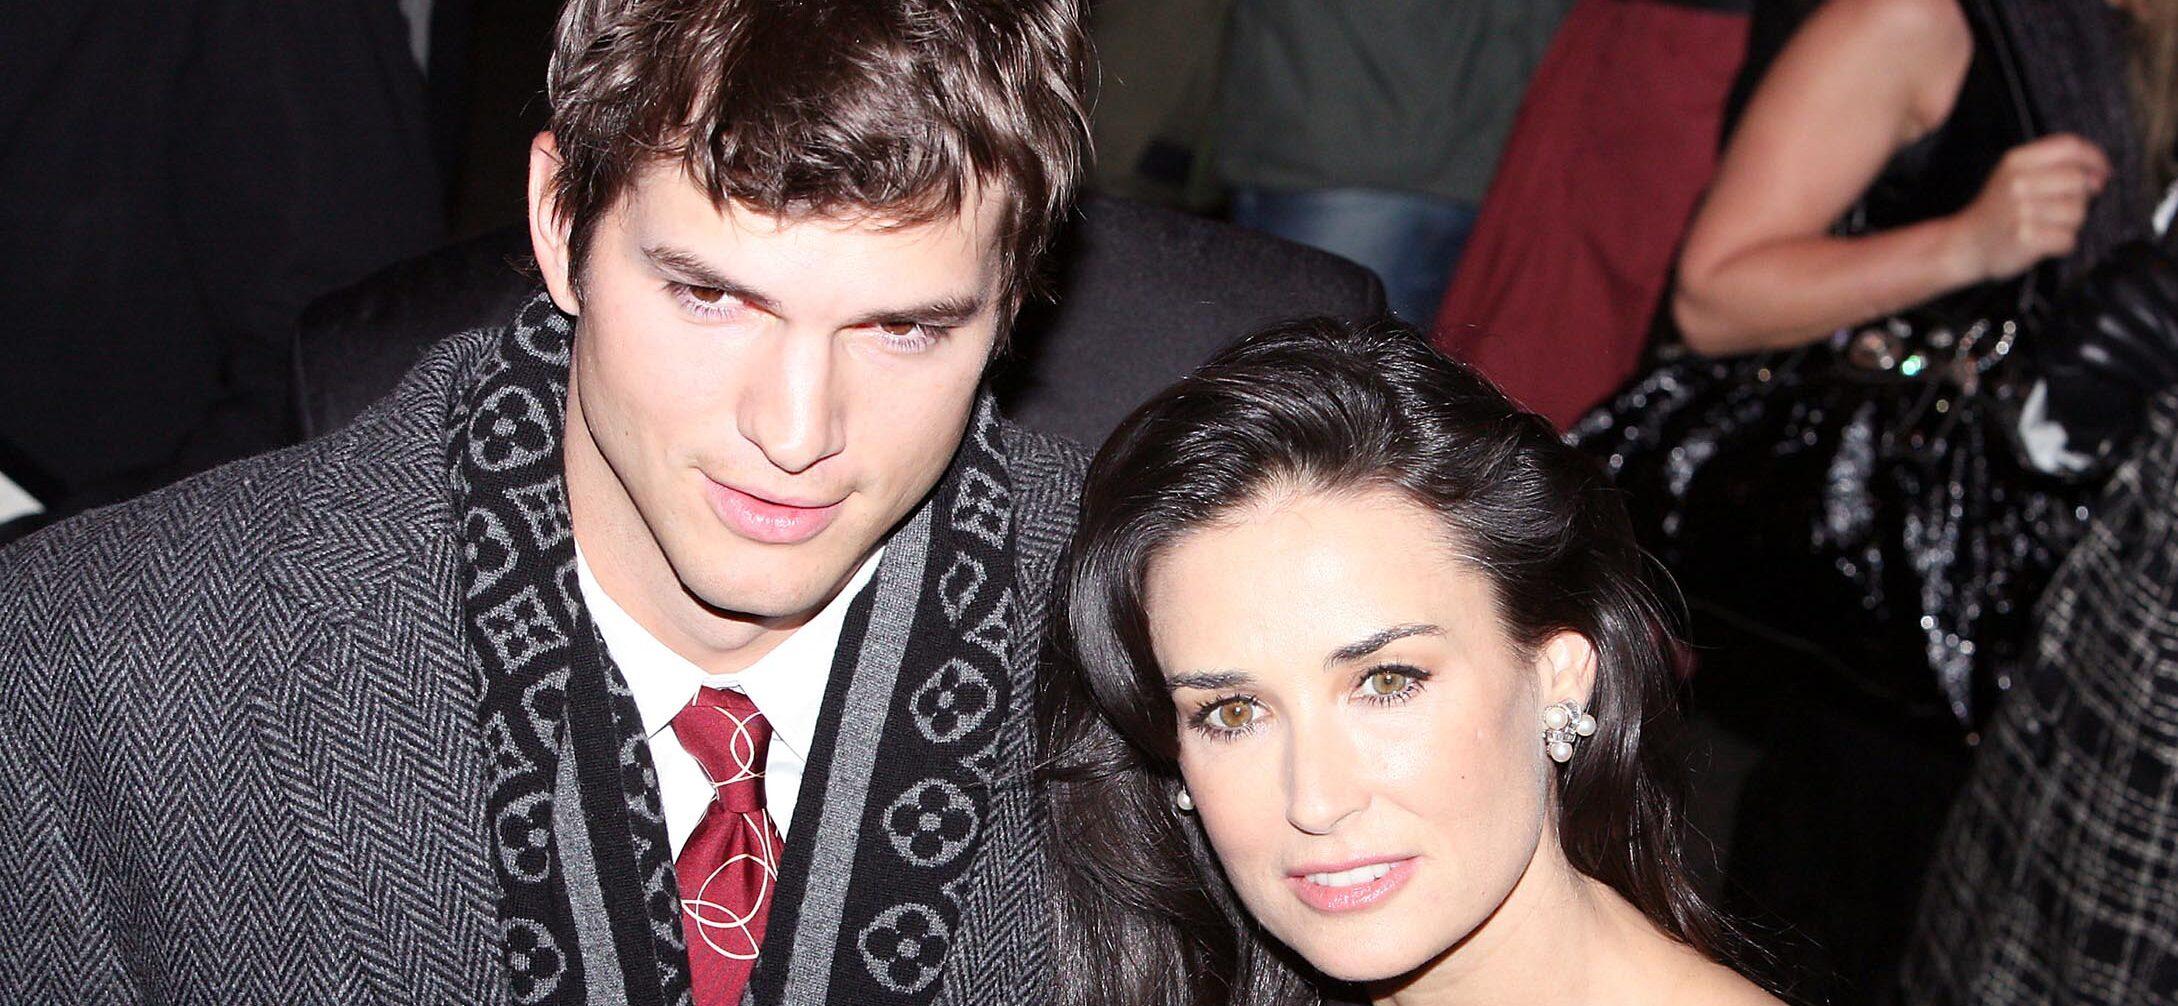 DEMI MOORE AND ASHTON KUTCHER ARRIVE AT THE UK CHARITY PREMIERE OF 'FLAWLESS'